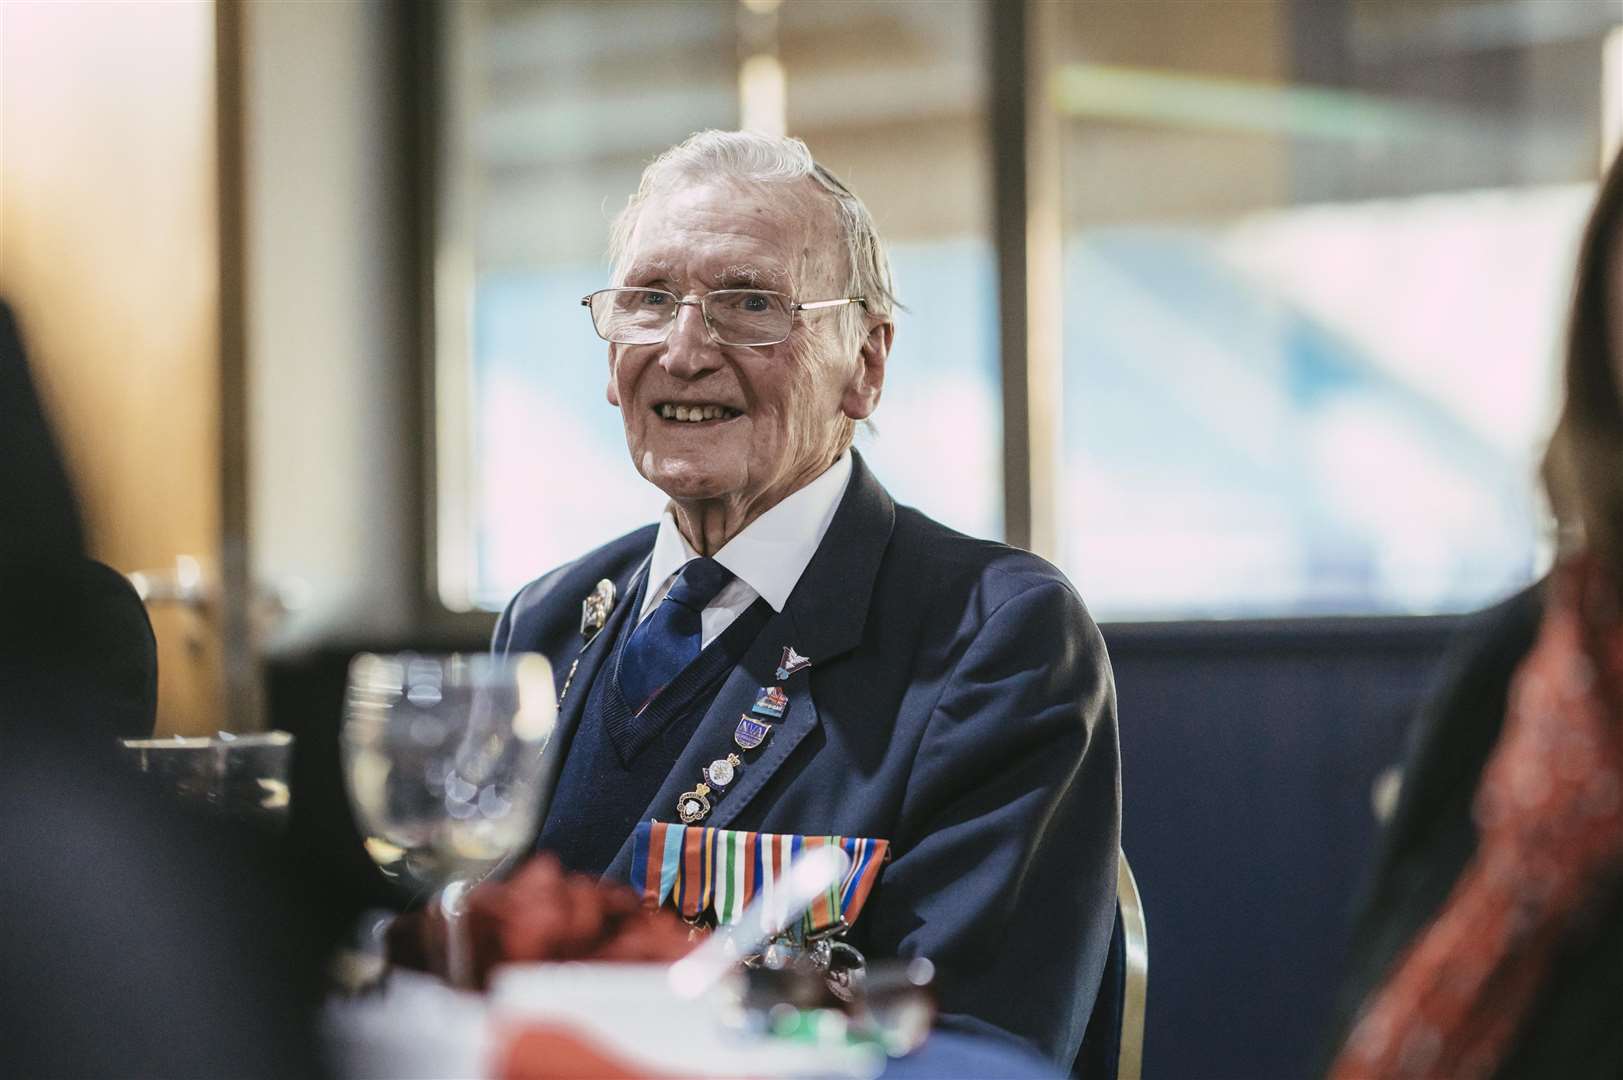 Peter Smoothy, 97, of Herne Bay has fallen victim to the Passport Office delays meaning he may miss out on a trip to Normandy. Picture: The Taxi Charity.